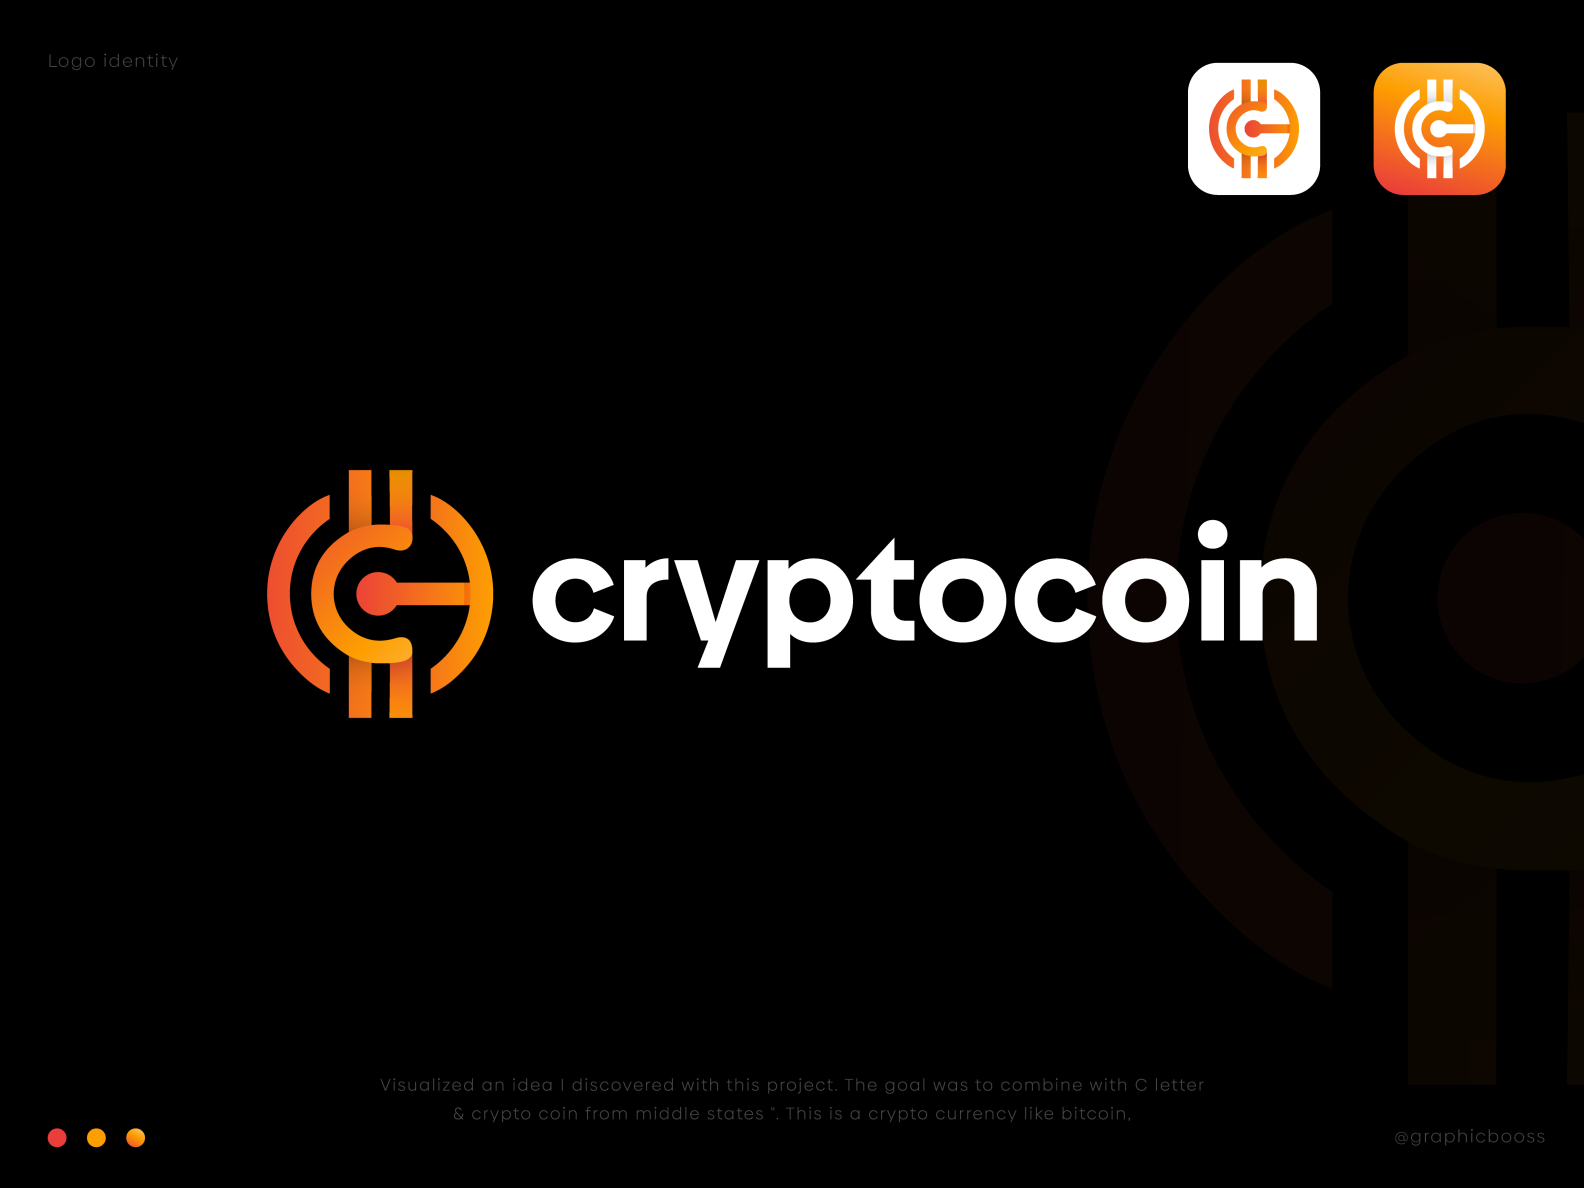 C coin cryptocurrency 0.1559 btc usd